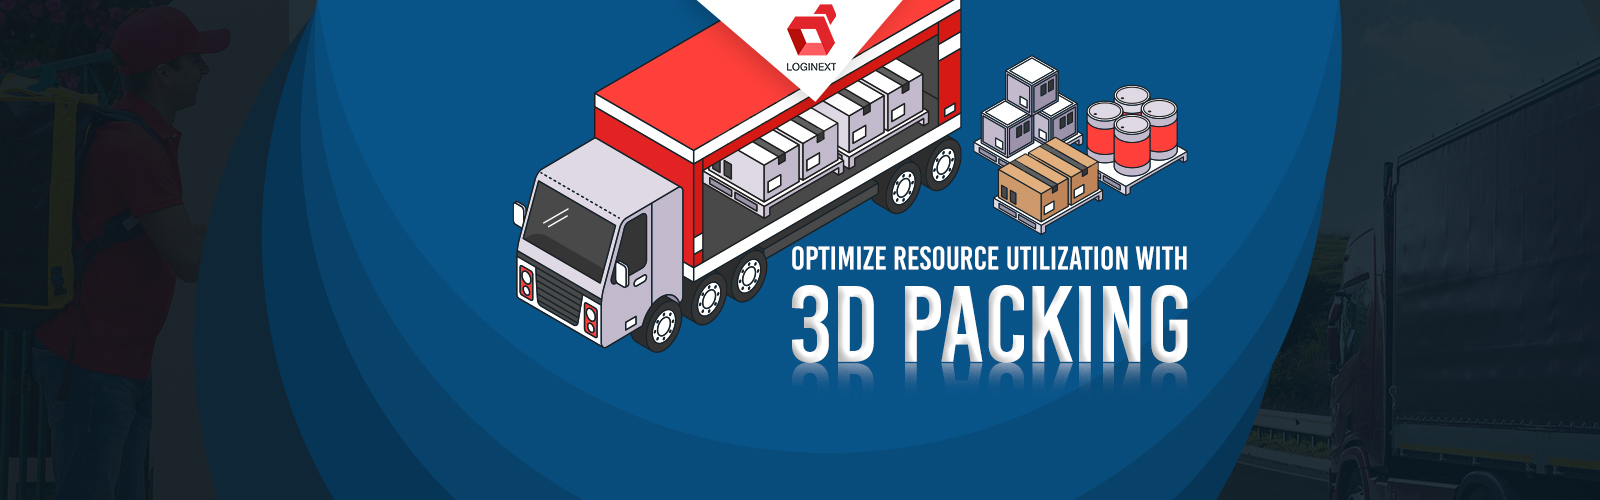 Why 3D Packing Optimization is a must have in your Transportation Management System